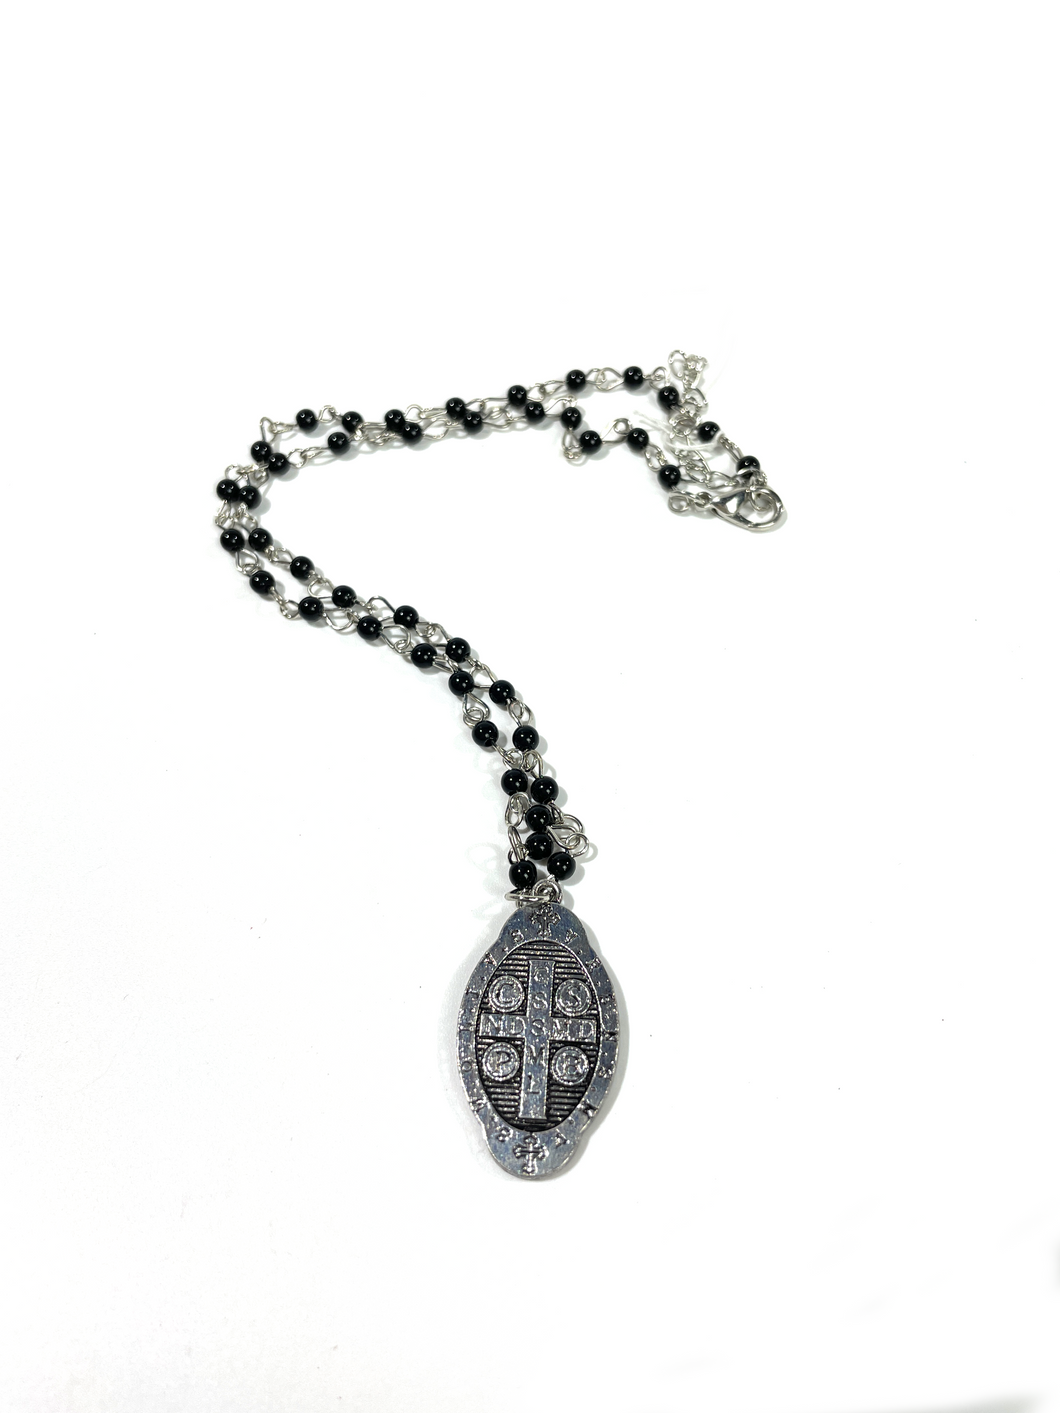 St. Benedict Blessing Necklace